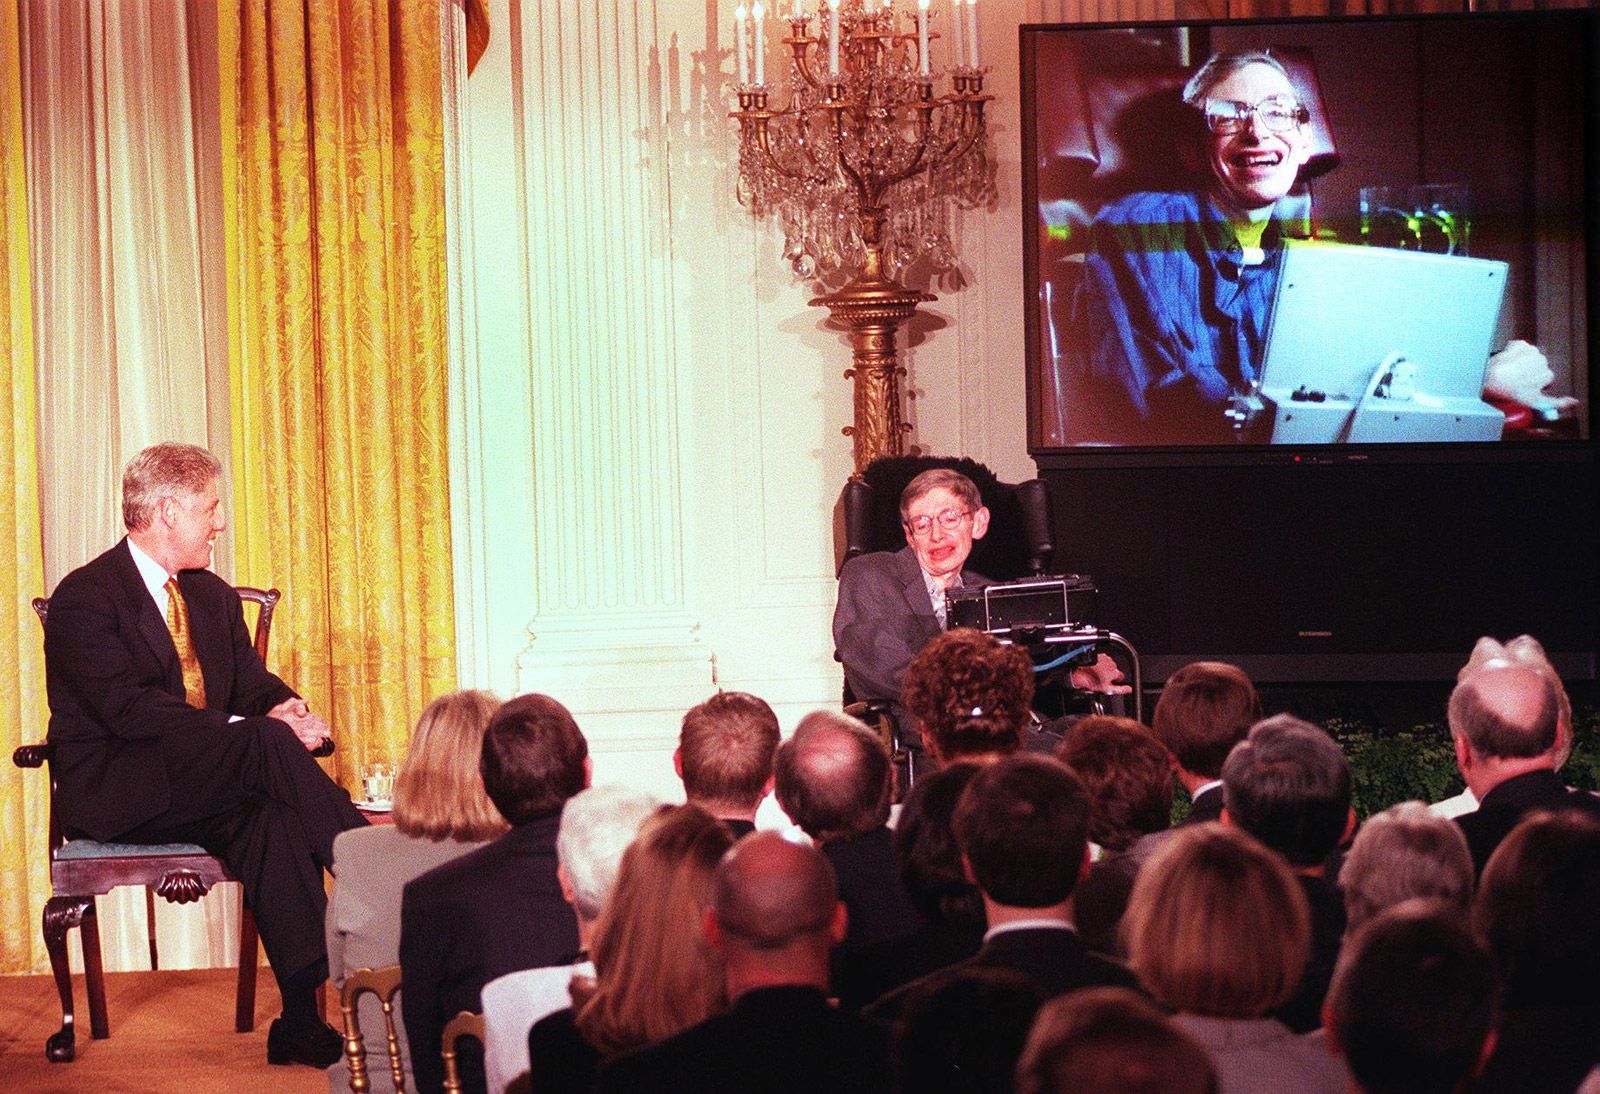 Stephen Hawkings remarkable life in pictures